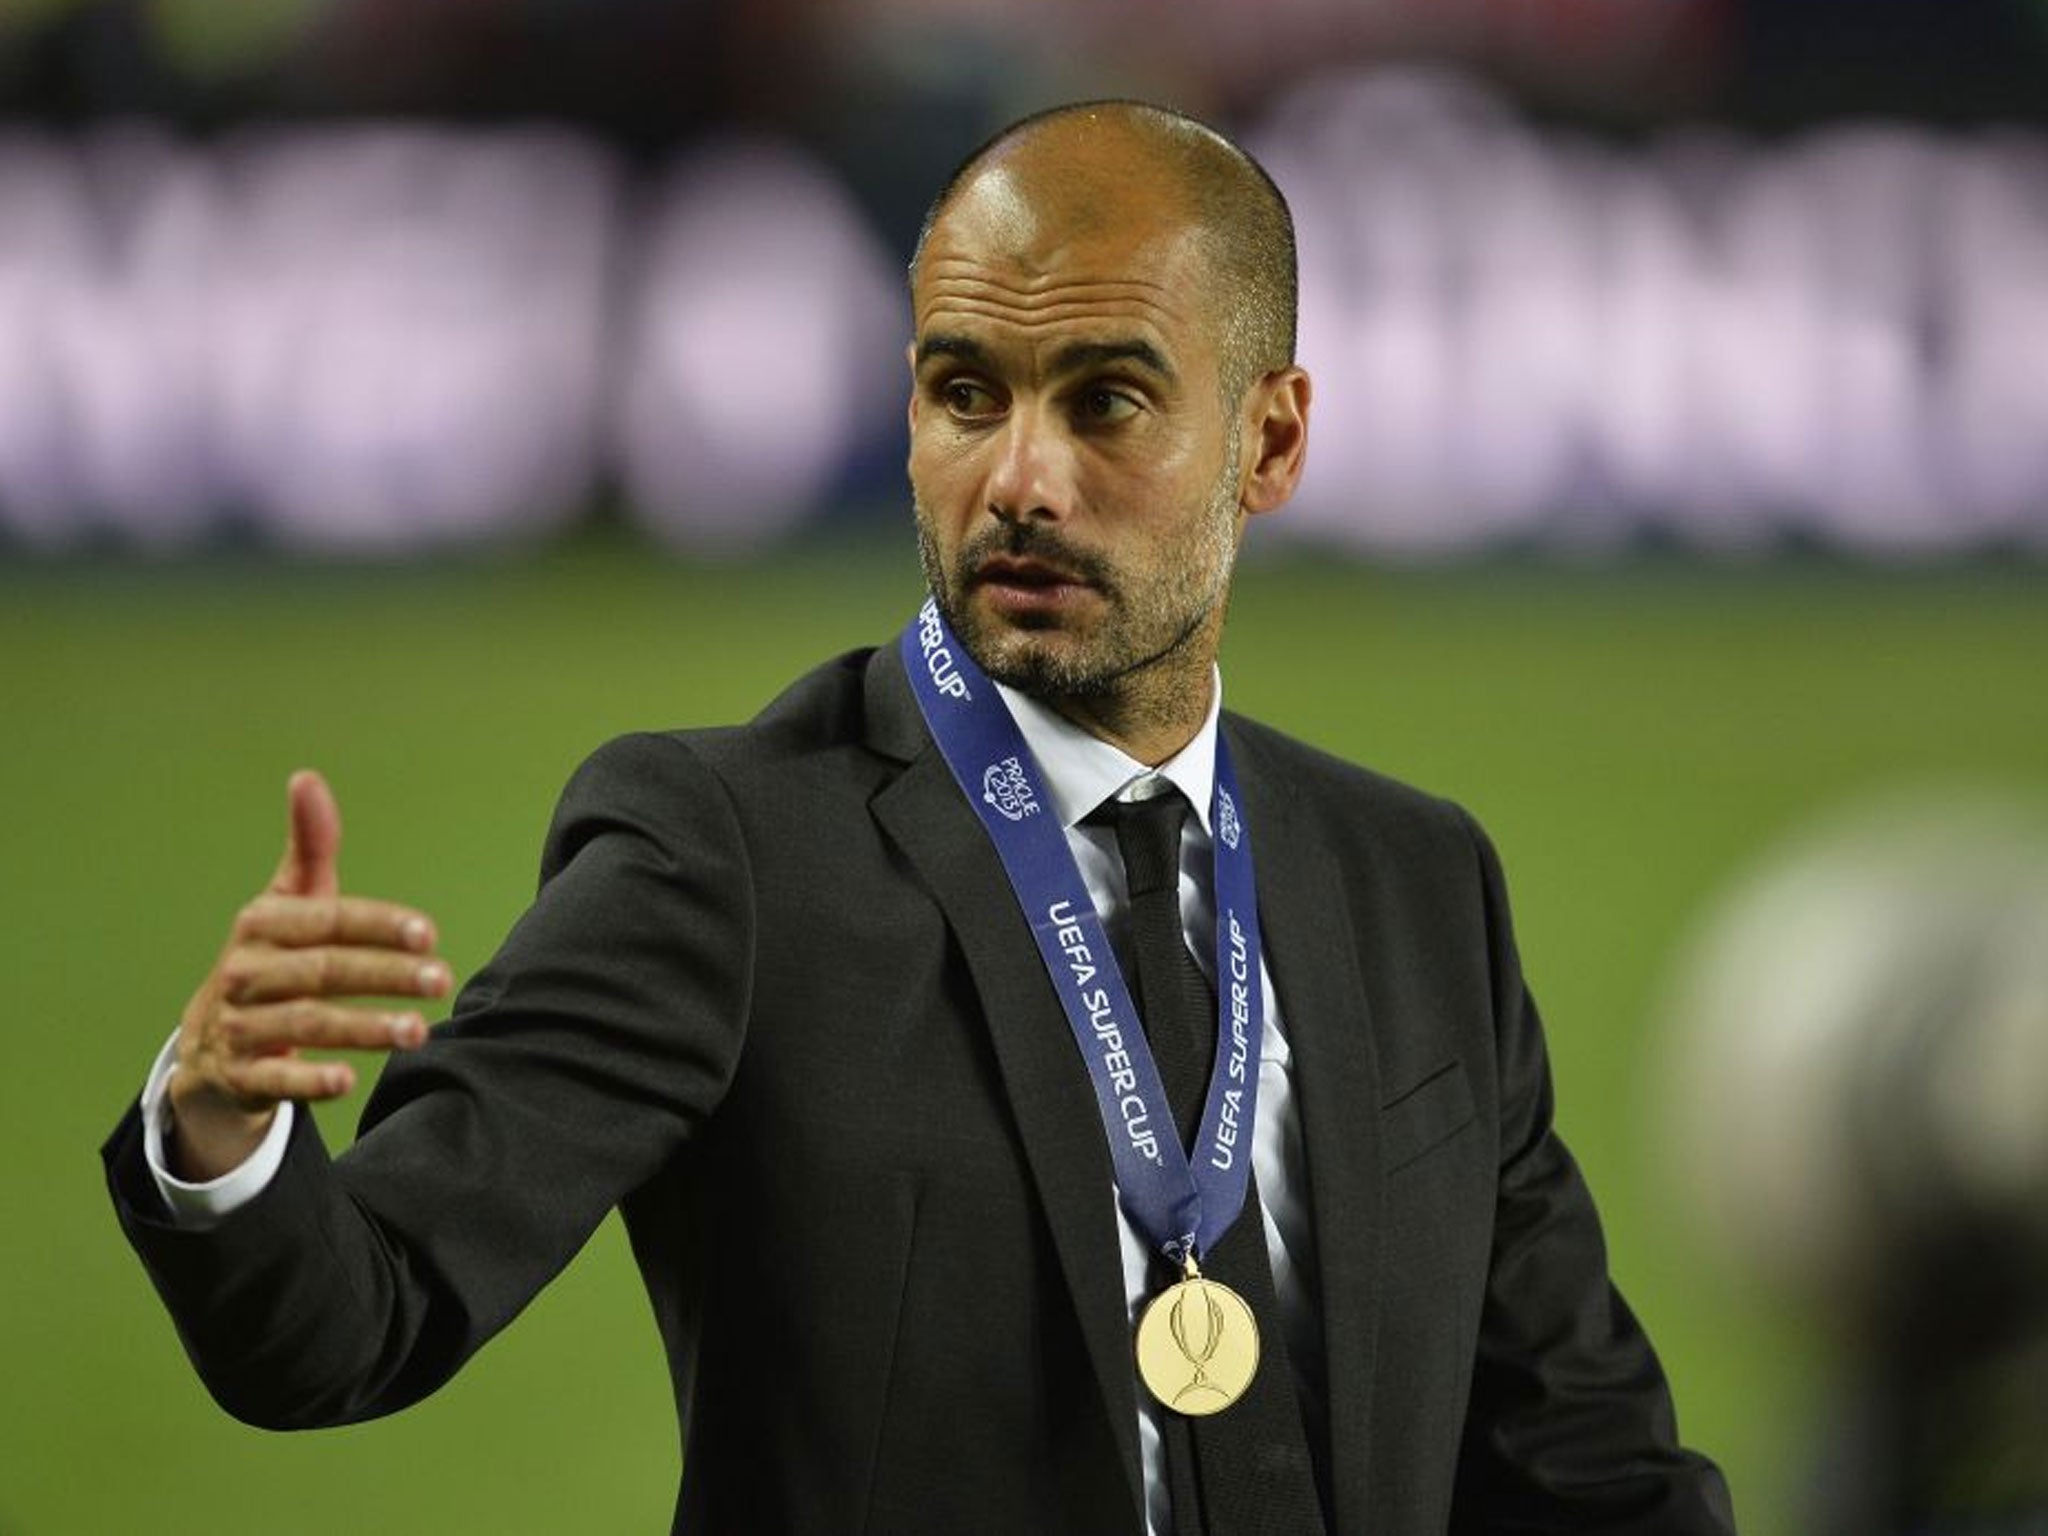 The intermediary indicated Guardiola felt he could improve England